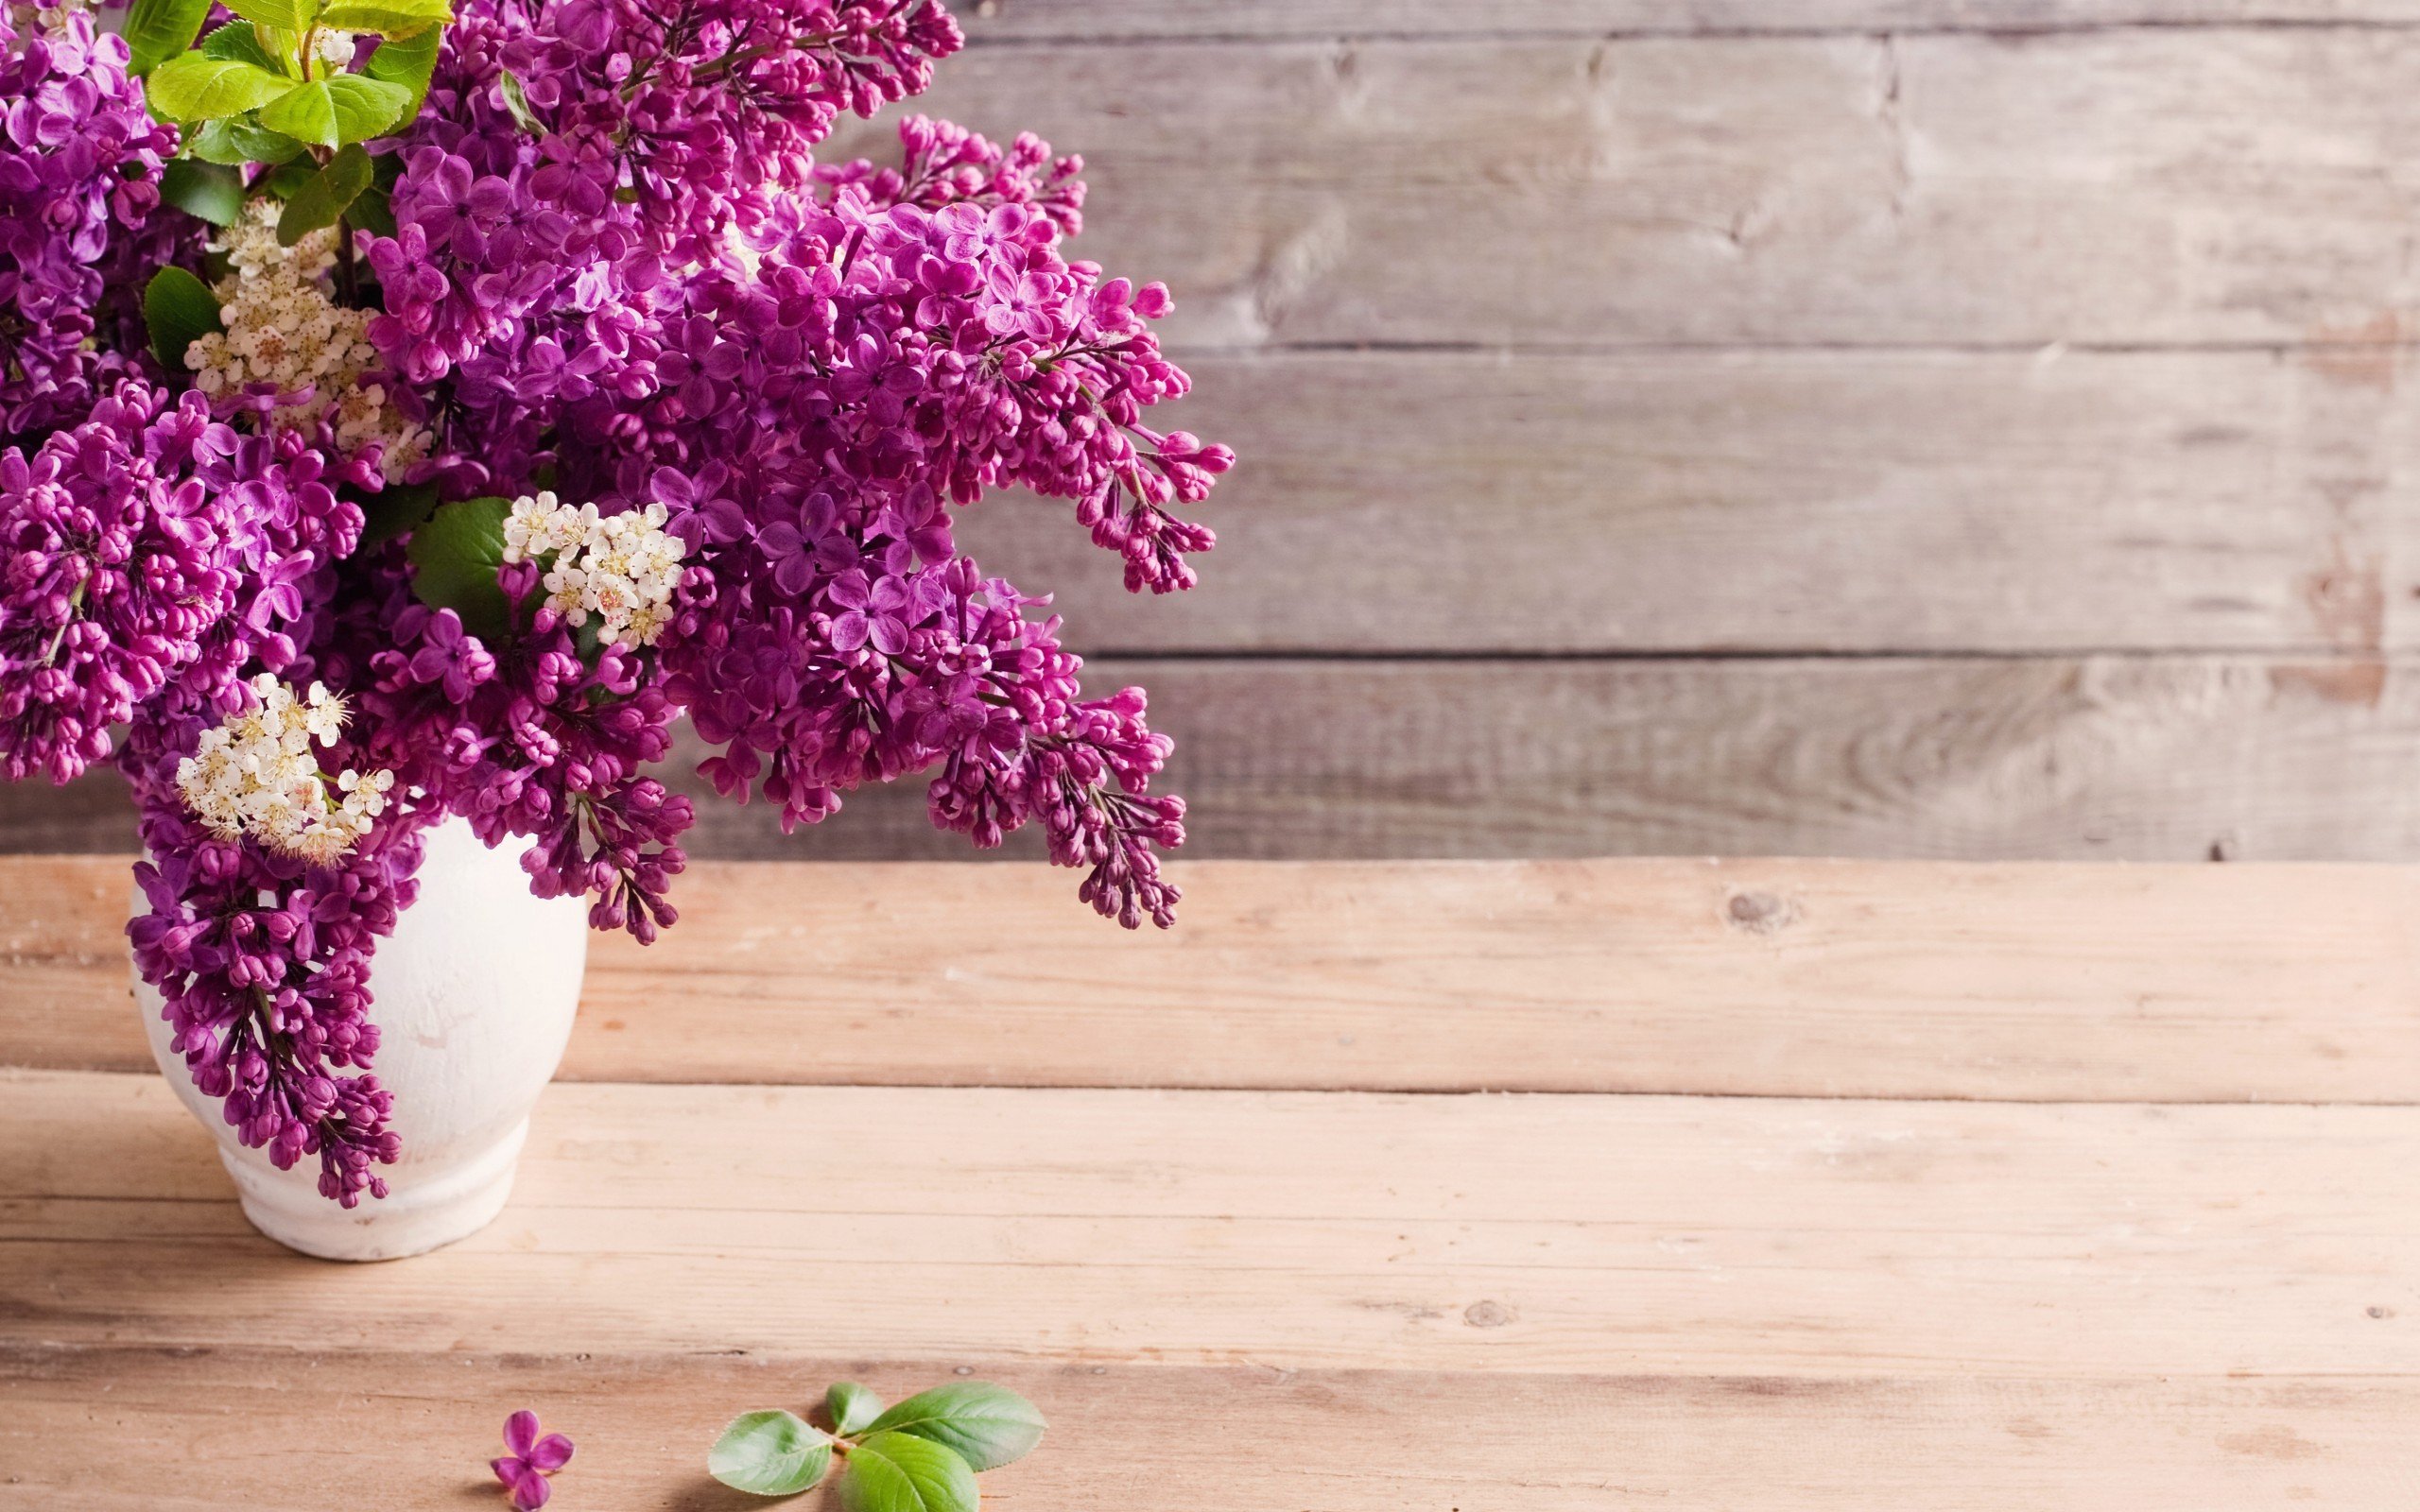 Flowers lilac vases wooden planks wallpaper 2560x1600